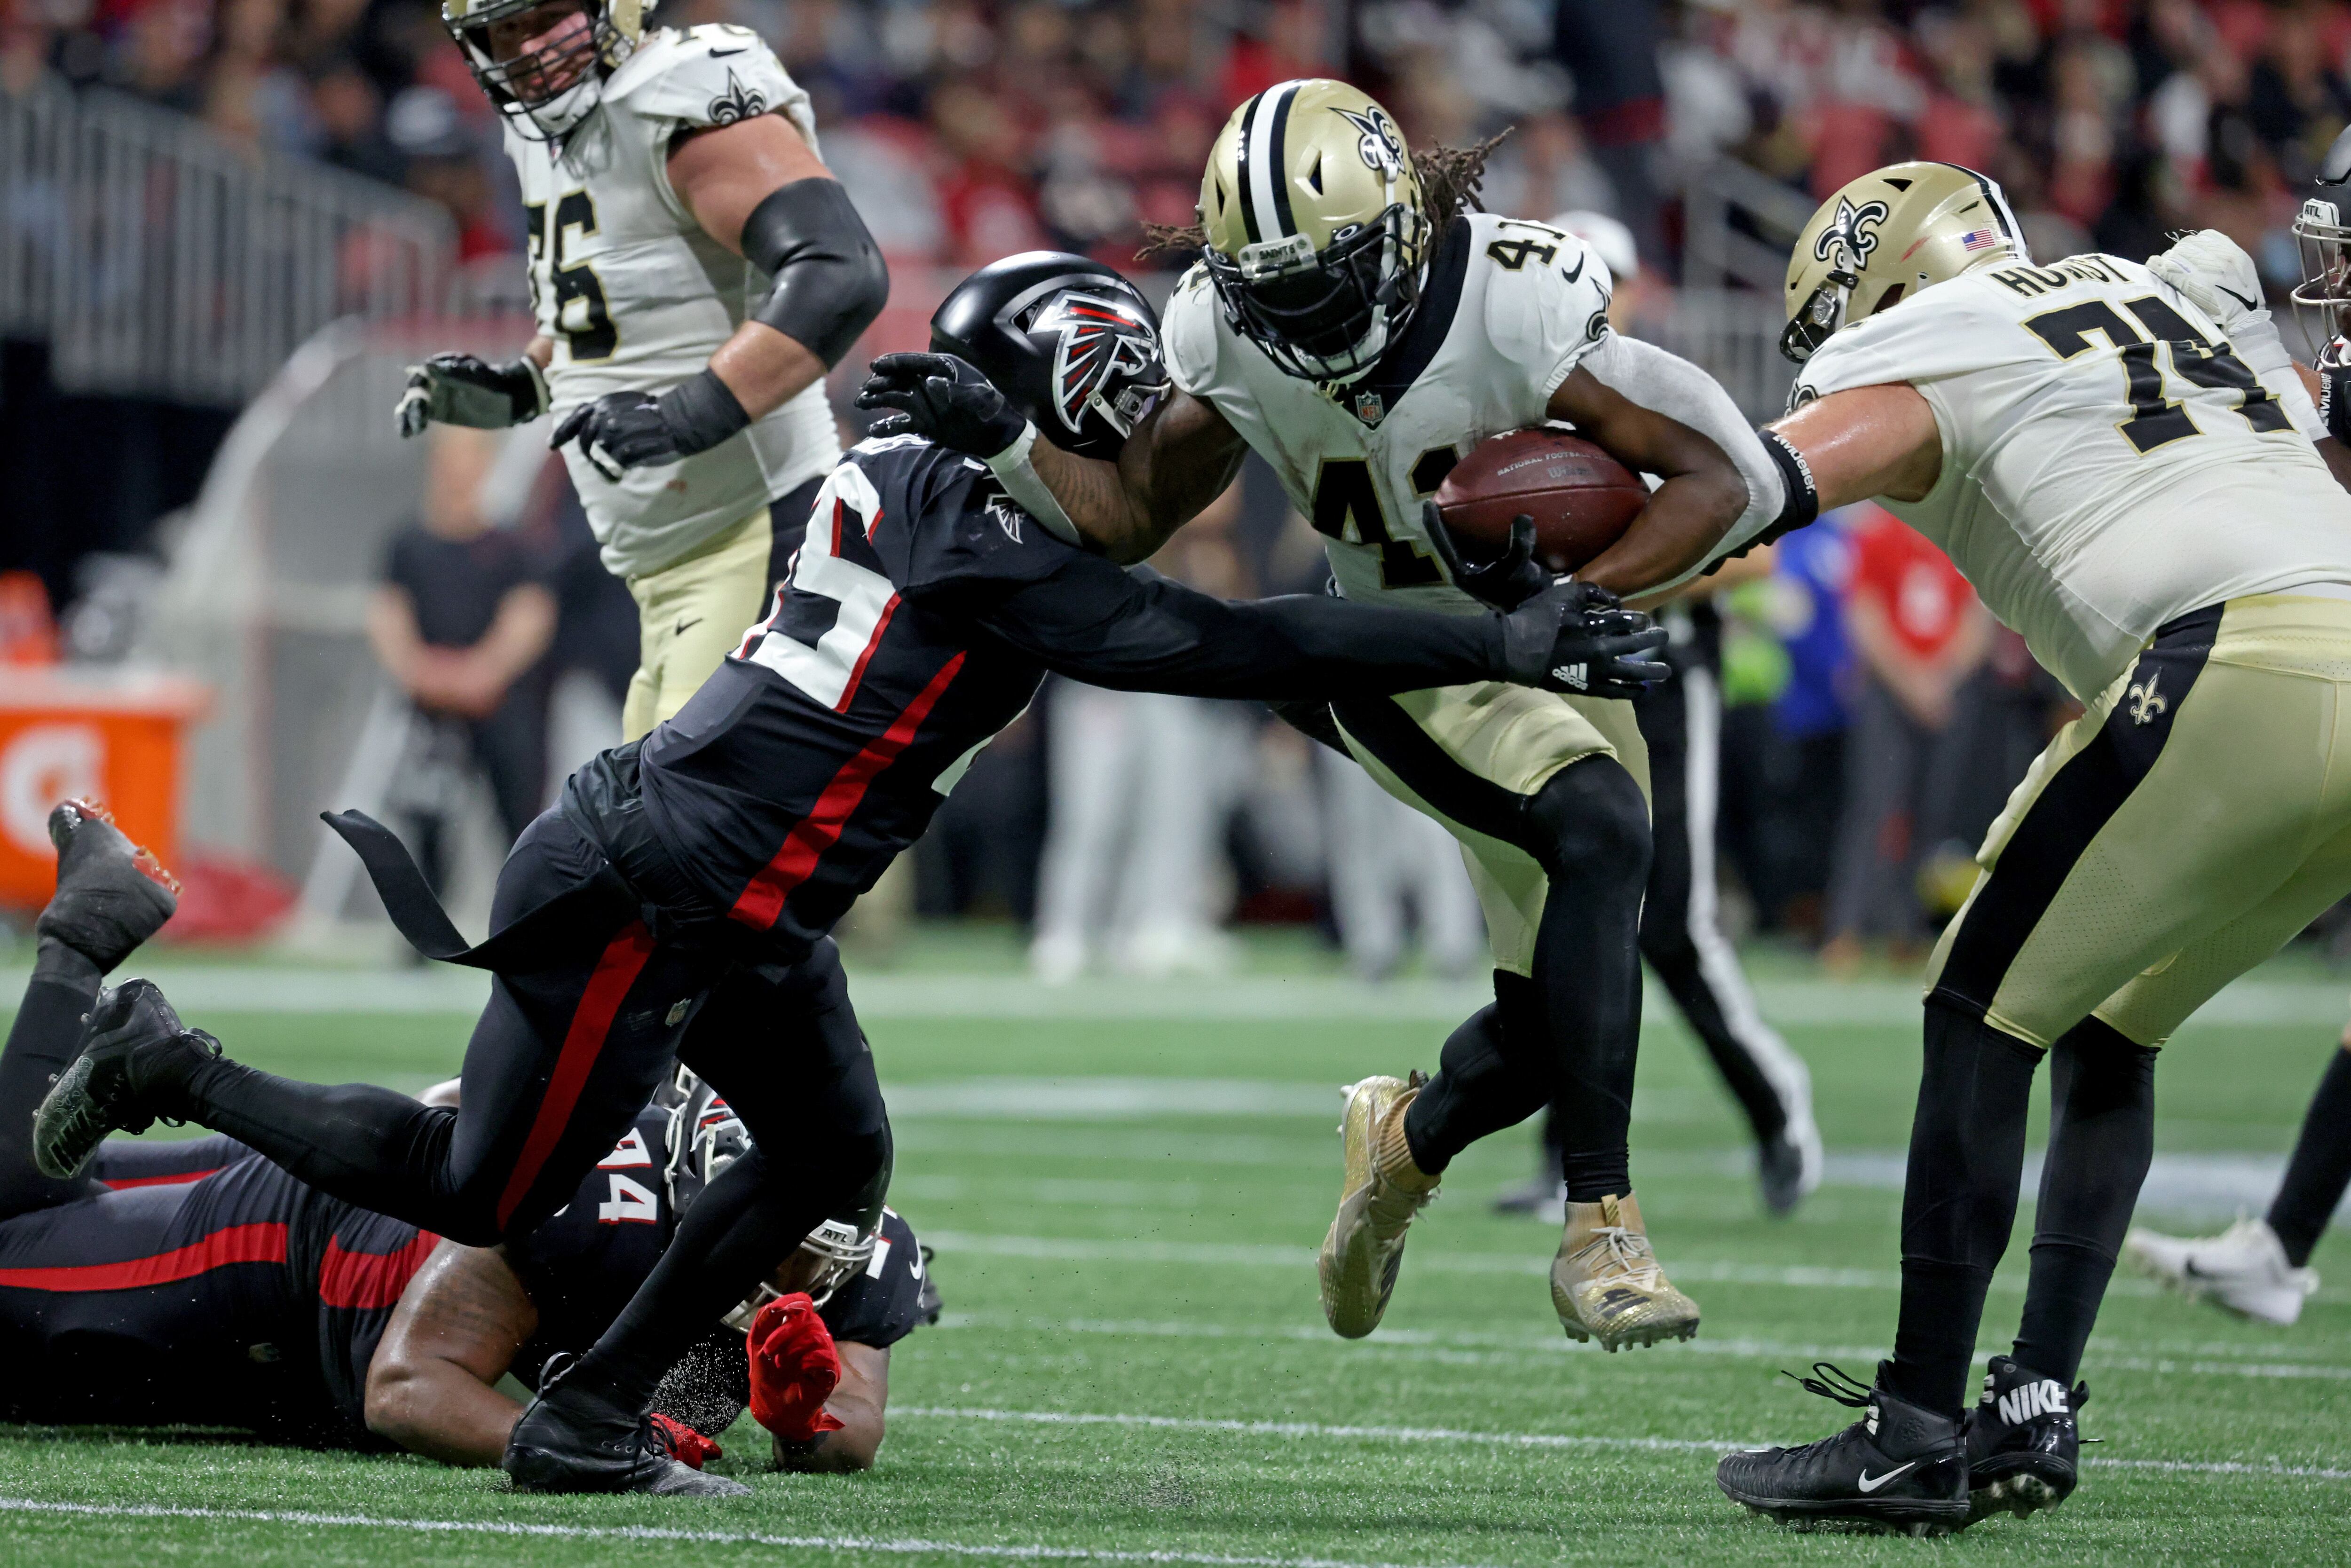 Falcons vs. Saints: 4 things we learned from Falcons' 20-17 win